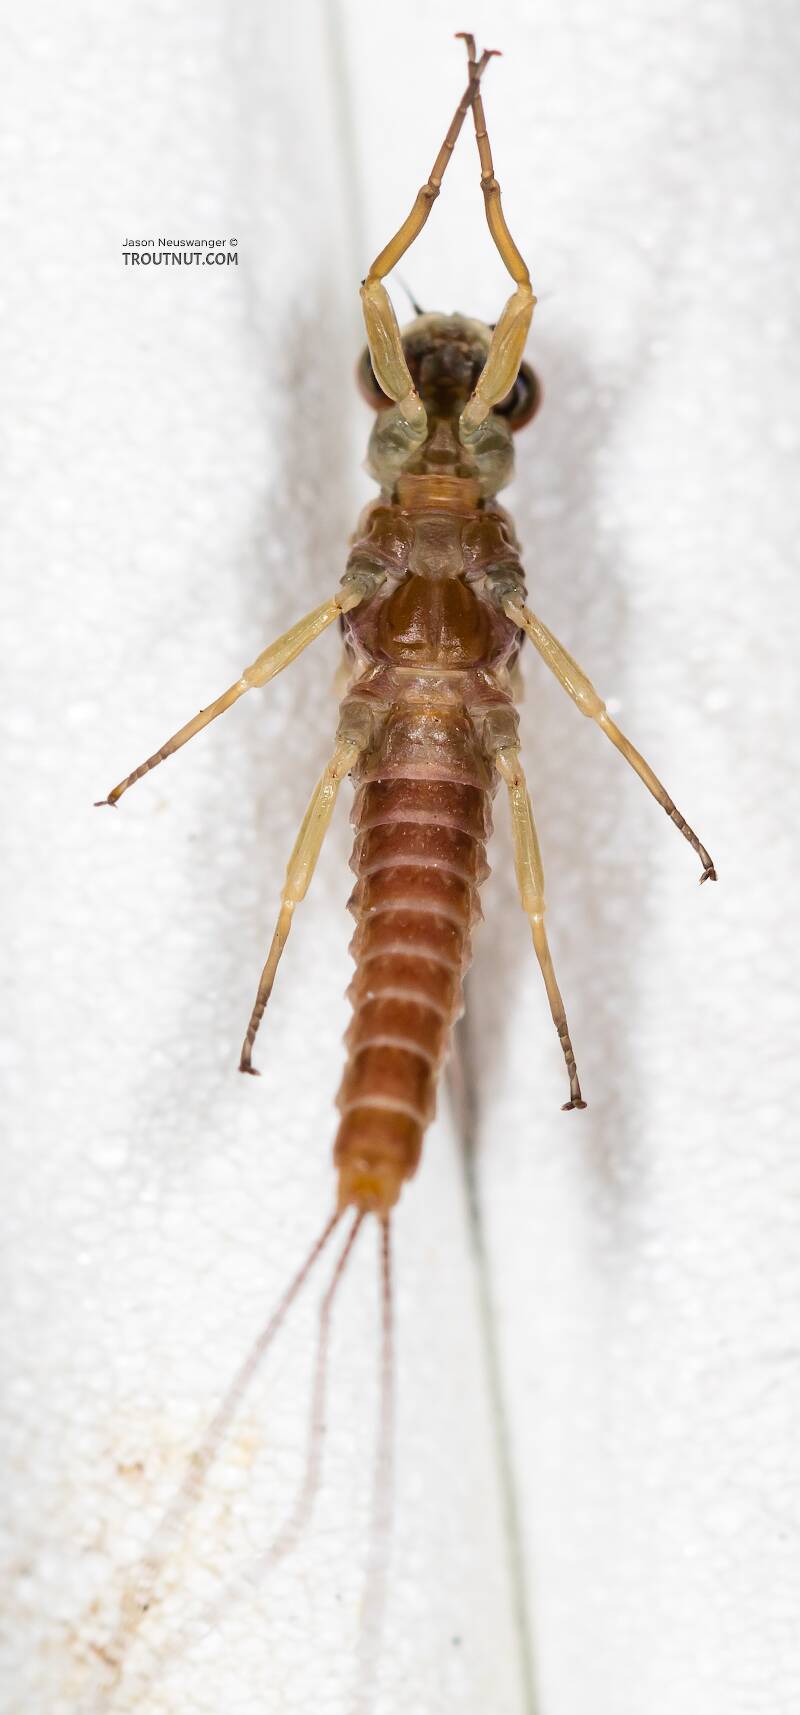 Ventral view of a Male Ephemerella aurivillii (Ephemerellidae) Mayfly Dun from the Madison River in Montana